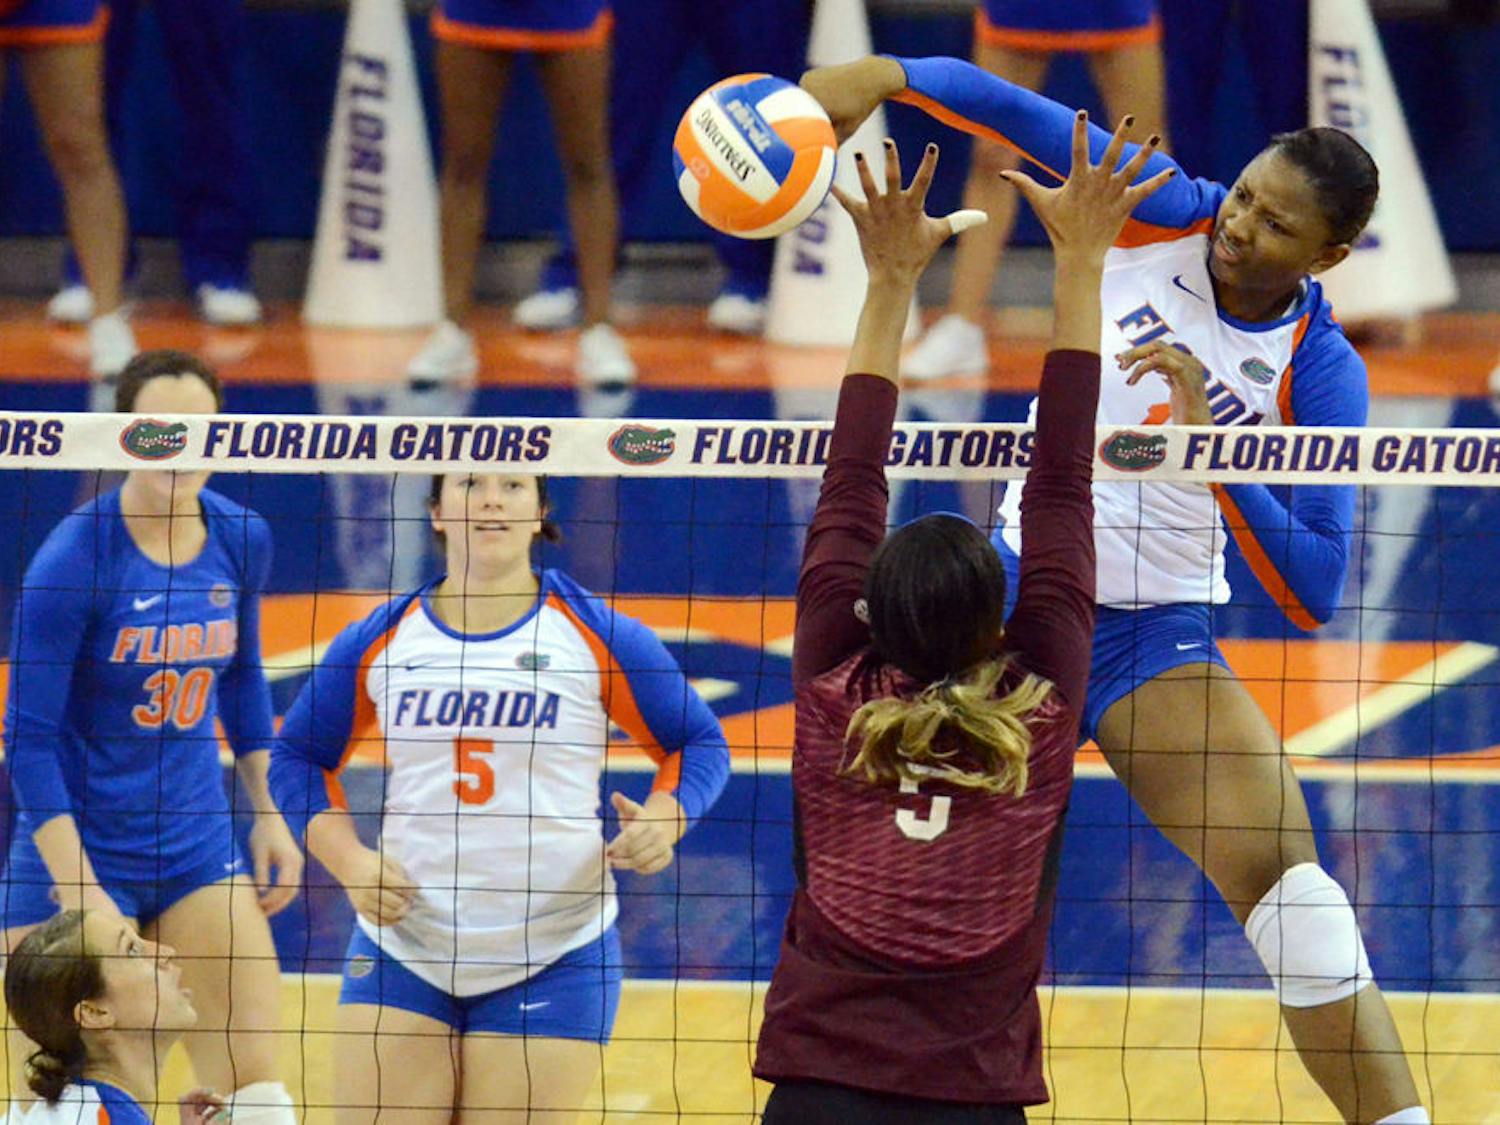 Rhamat Alhassan swings for a kill attempt during Florida's 3-0 win against Mississippi State.